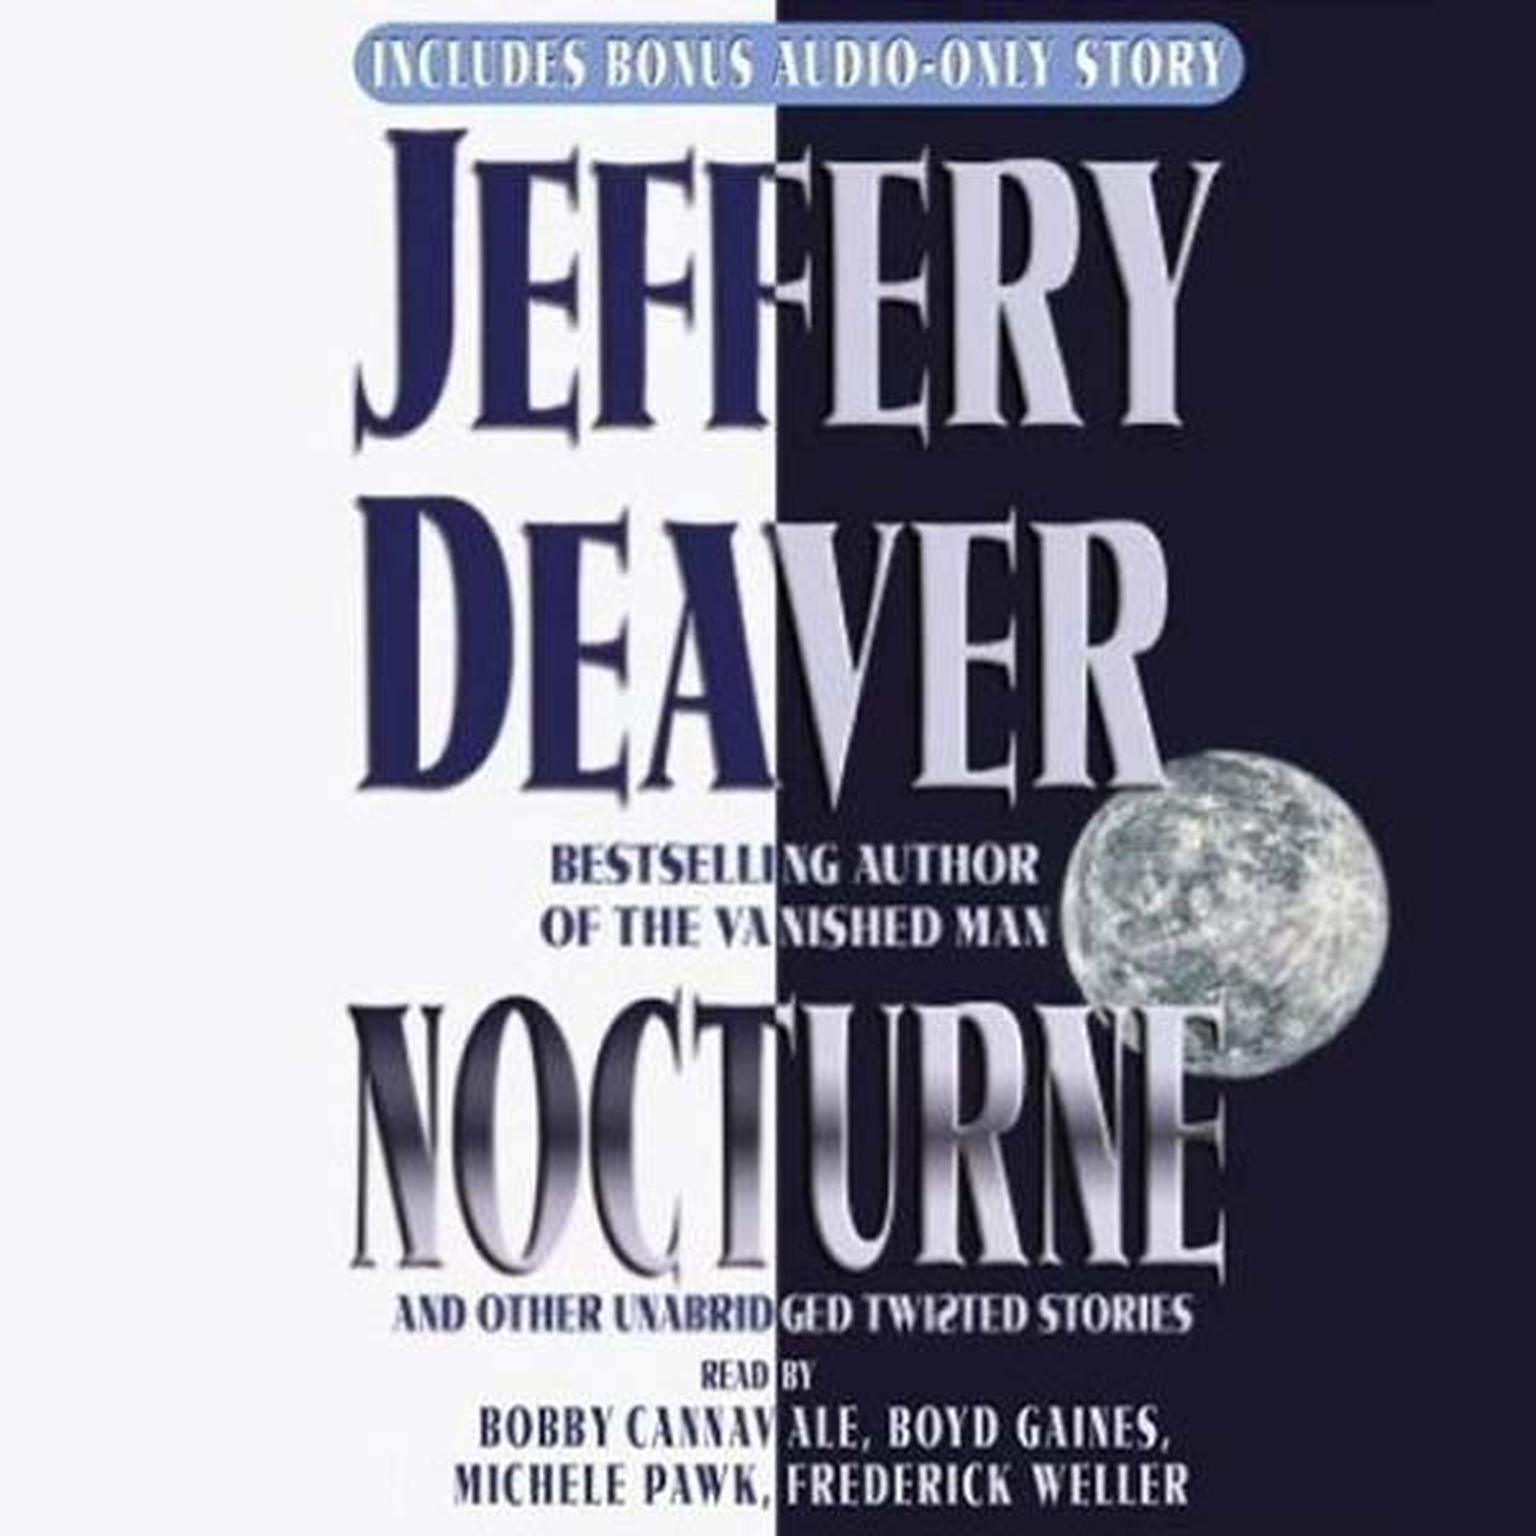 Nocturne: And Other Unabridged Twisted Stories Audiobook, by Jeffery Deaver